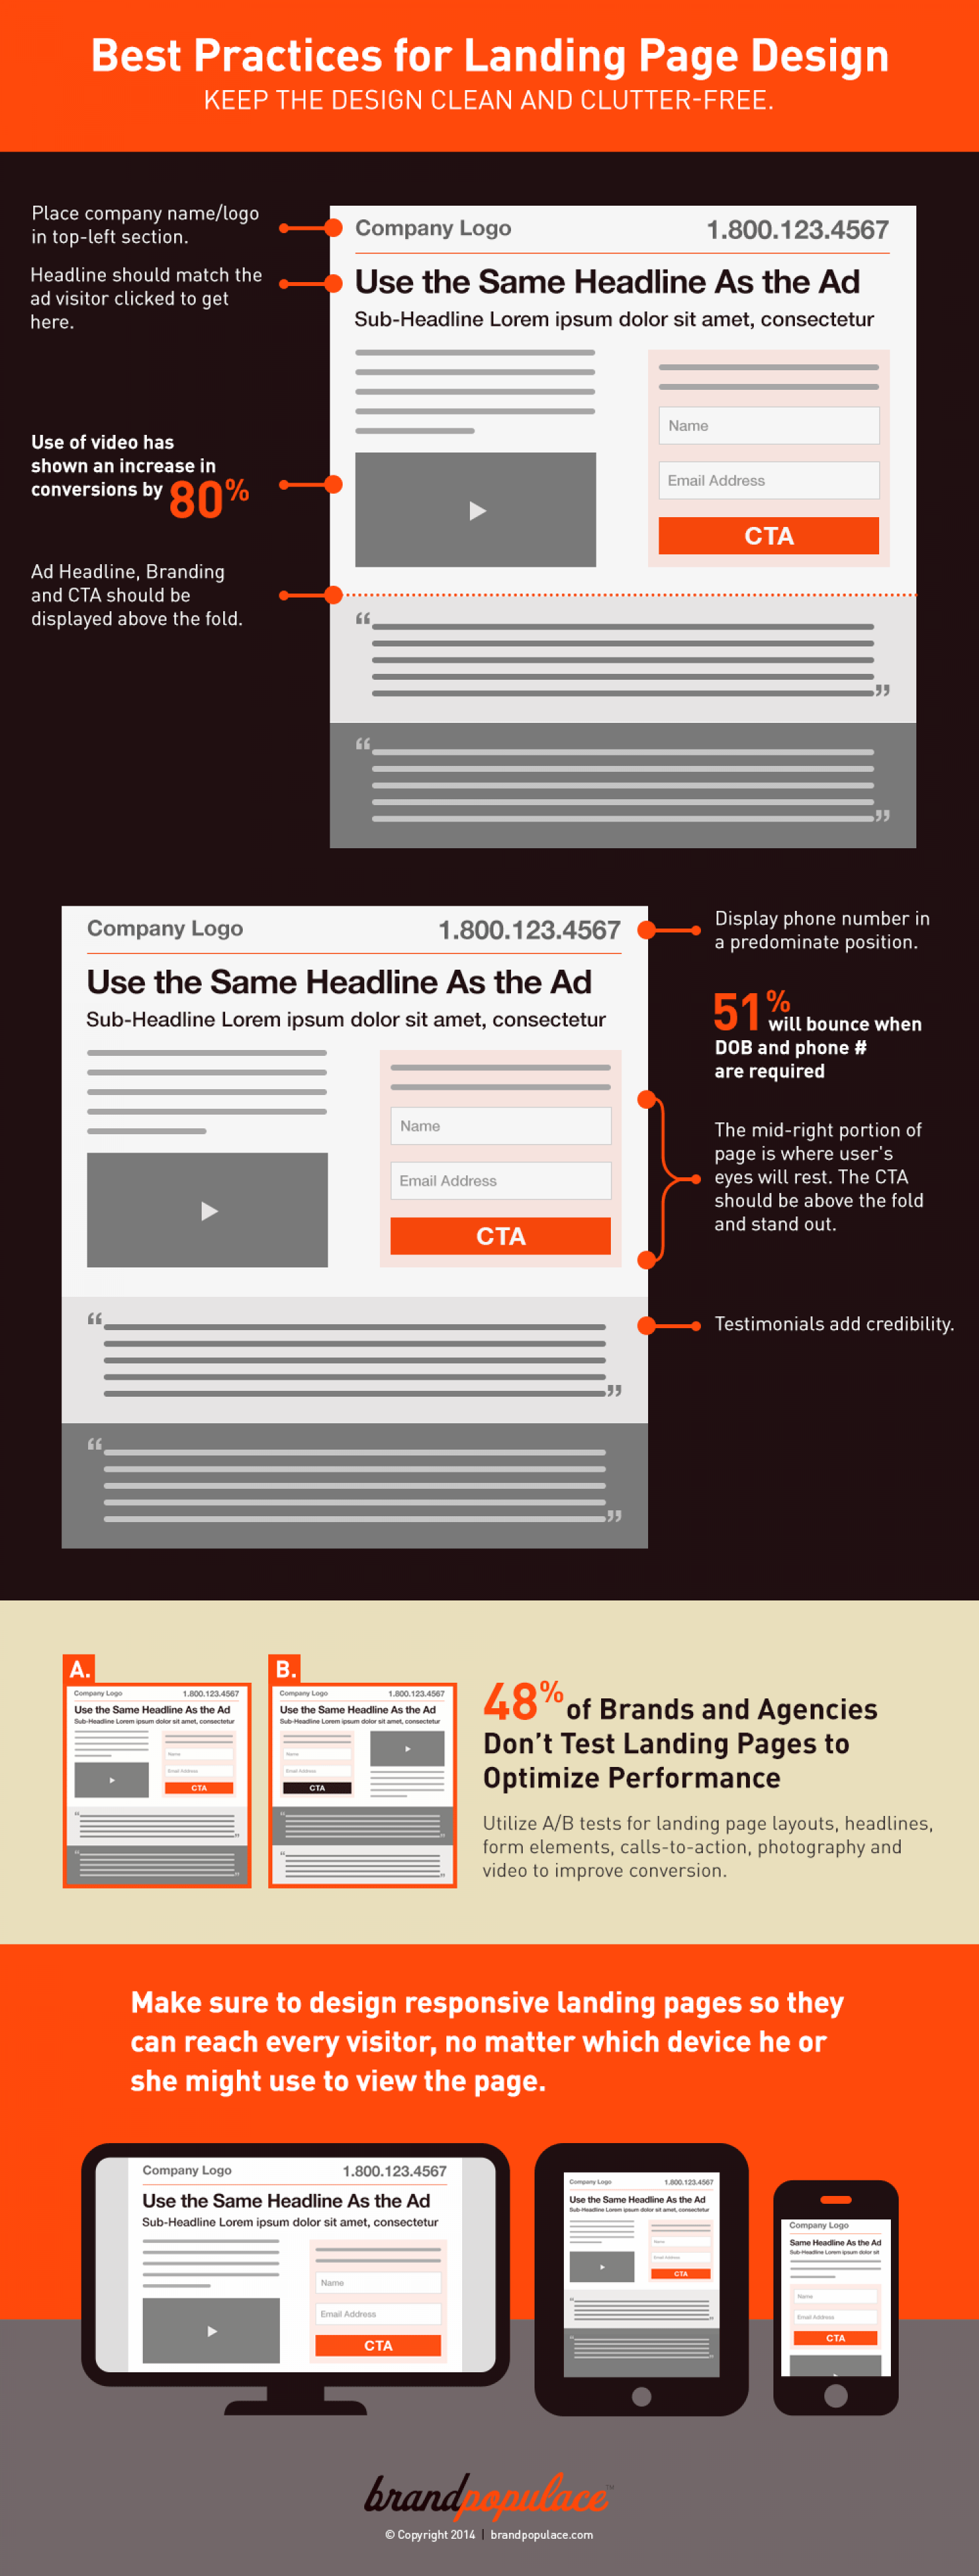 Best Practices for Landing Page Design Infographic